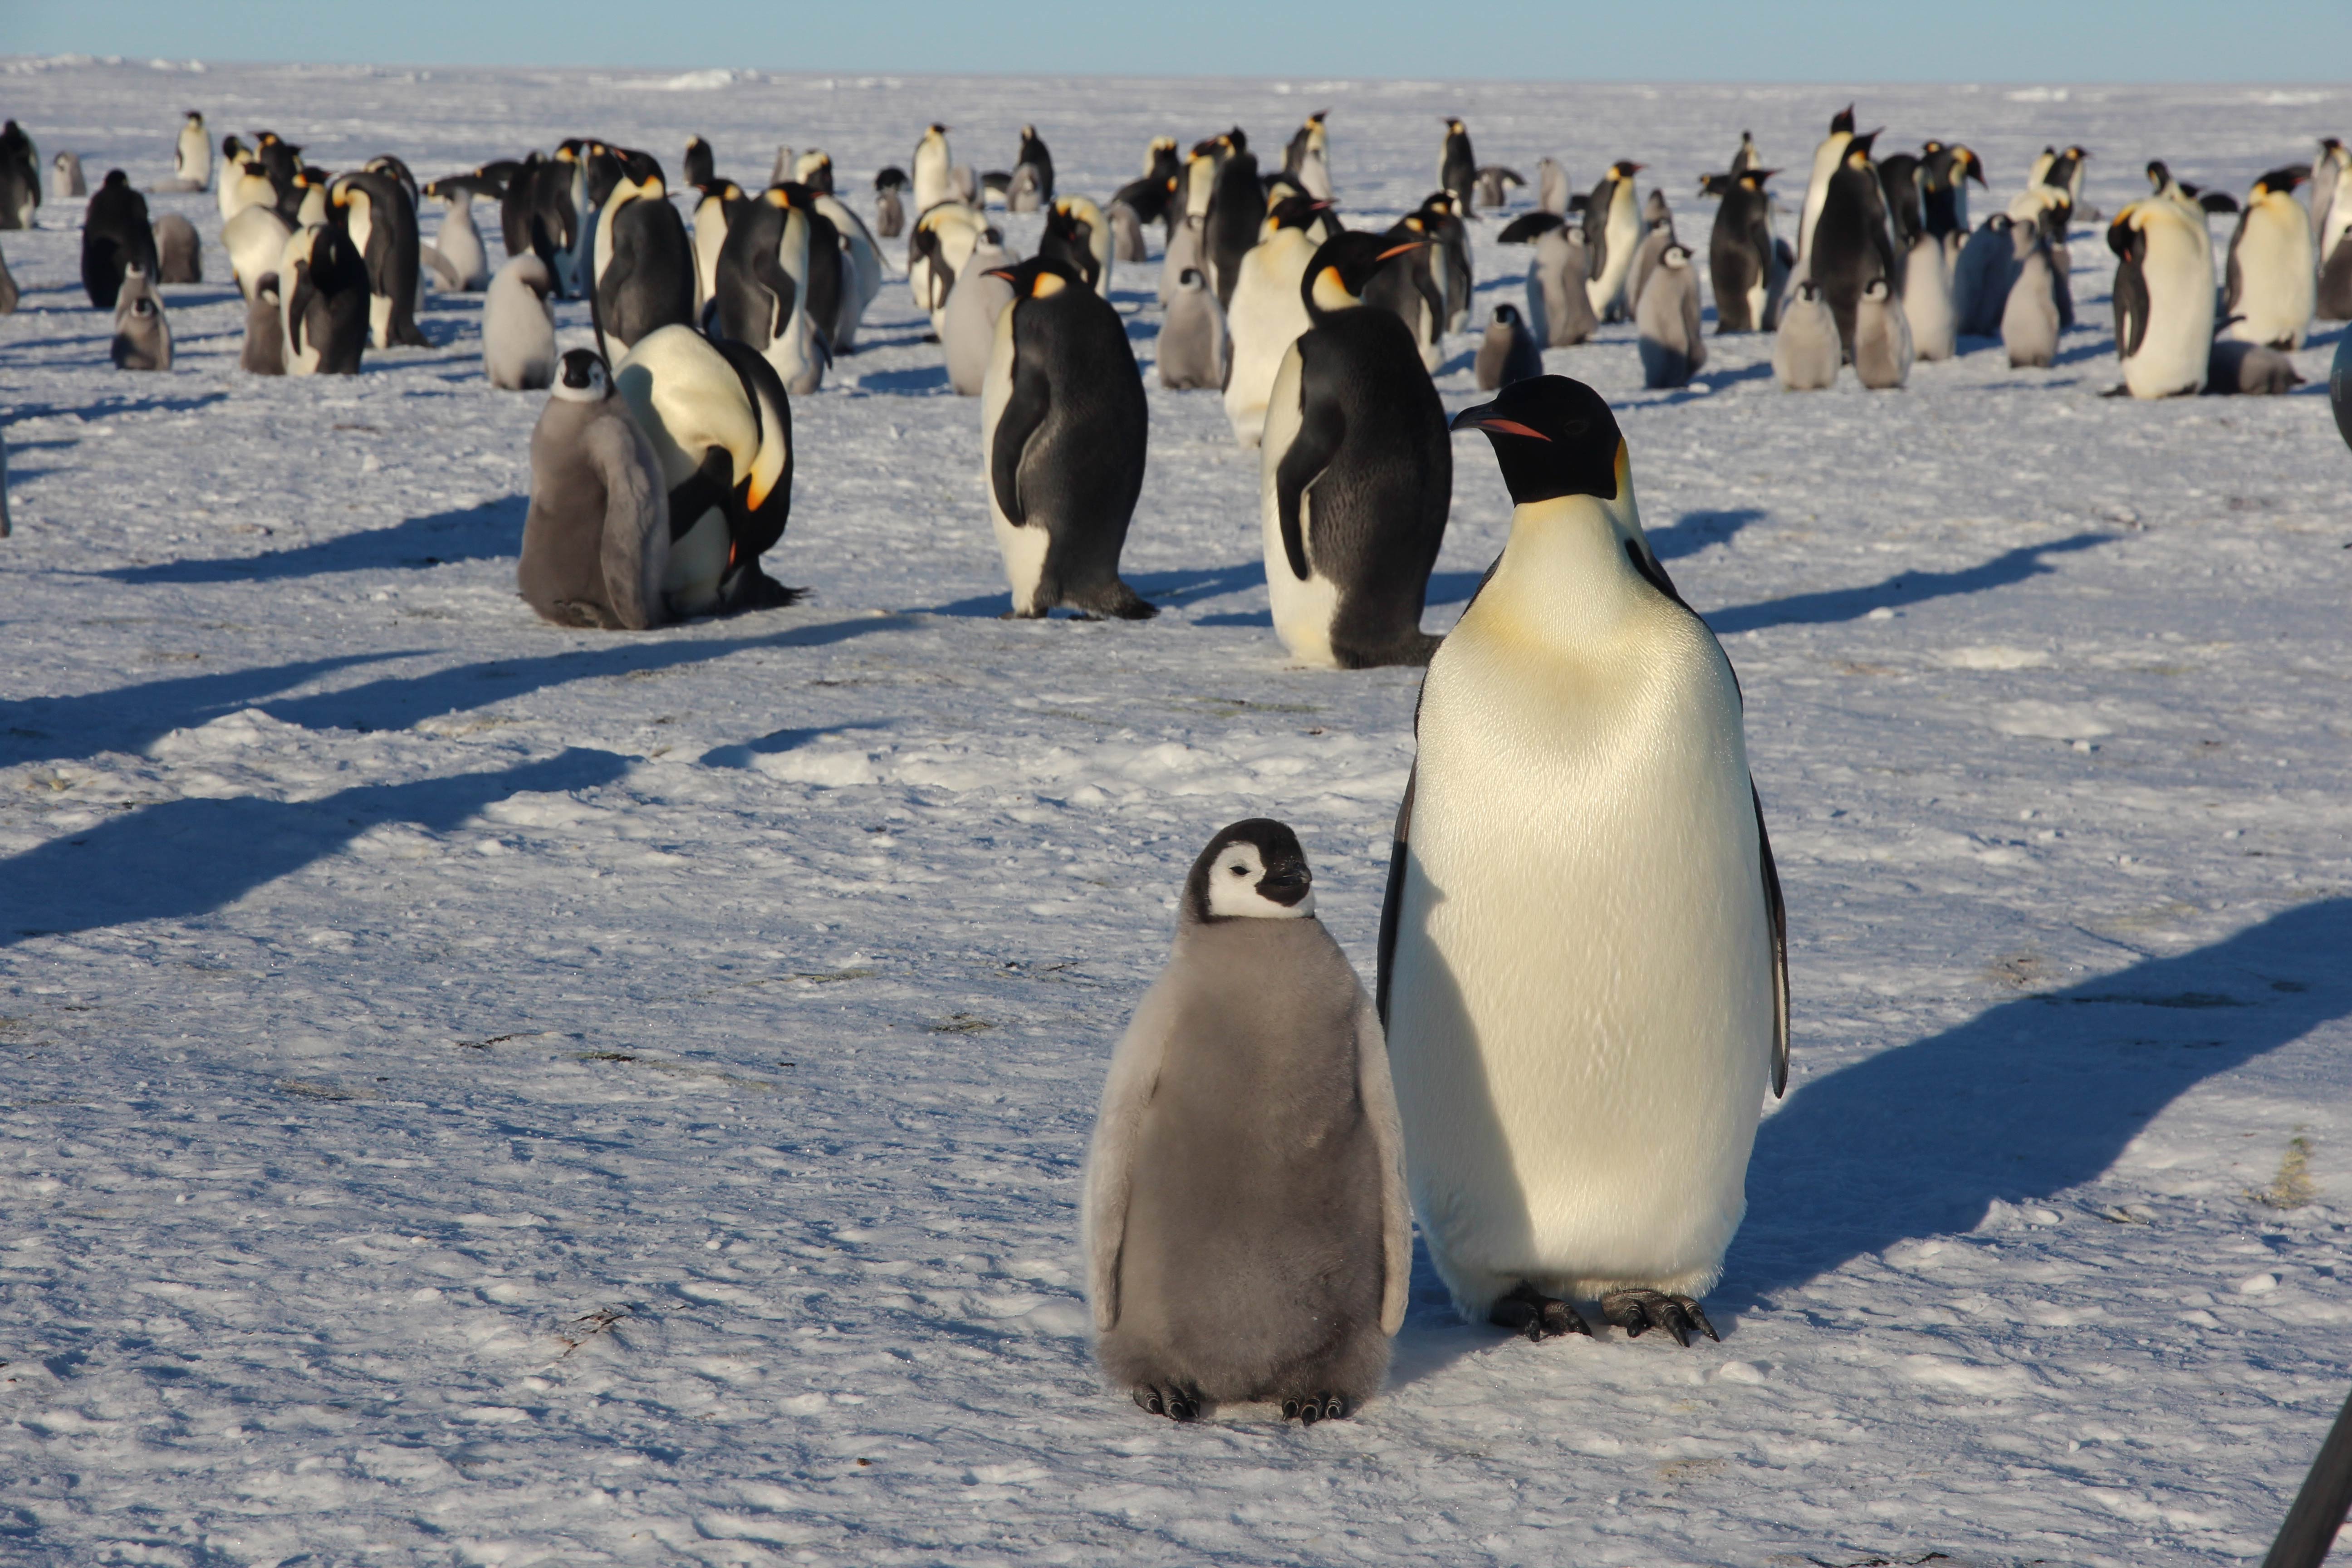 An adult Emperor penguin and chick on thick sea ice. Photo credit: Dr. Tom Hart, Penguin Watch